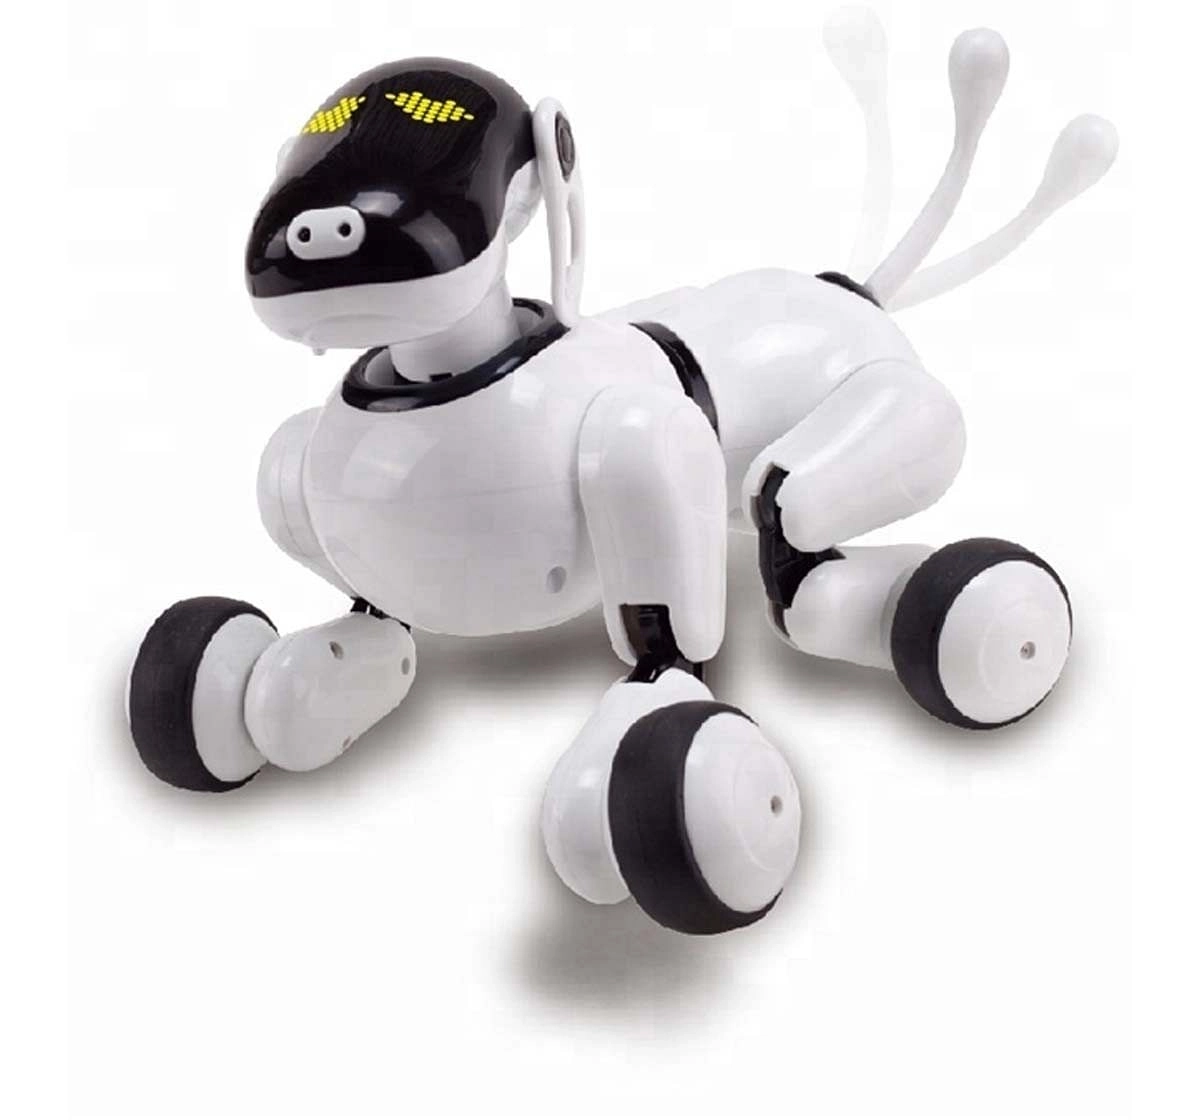 Puppy Go Smart Dog-White Remote Control Toys for Kids age 8Y+